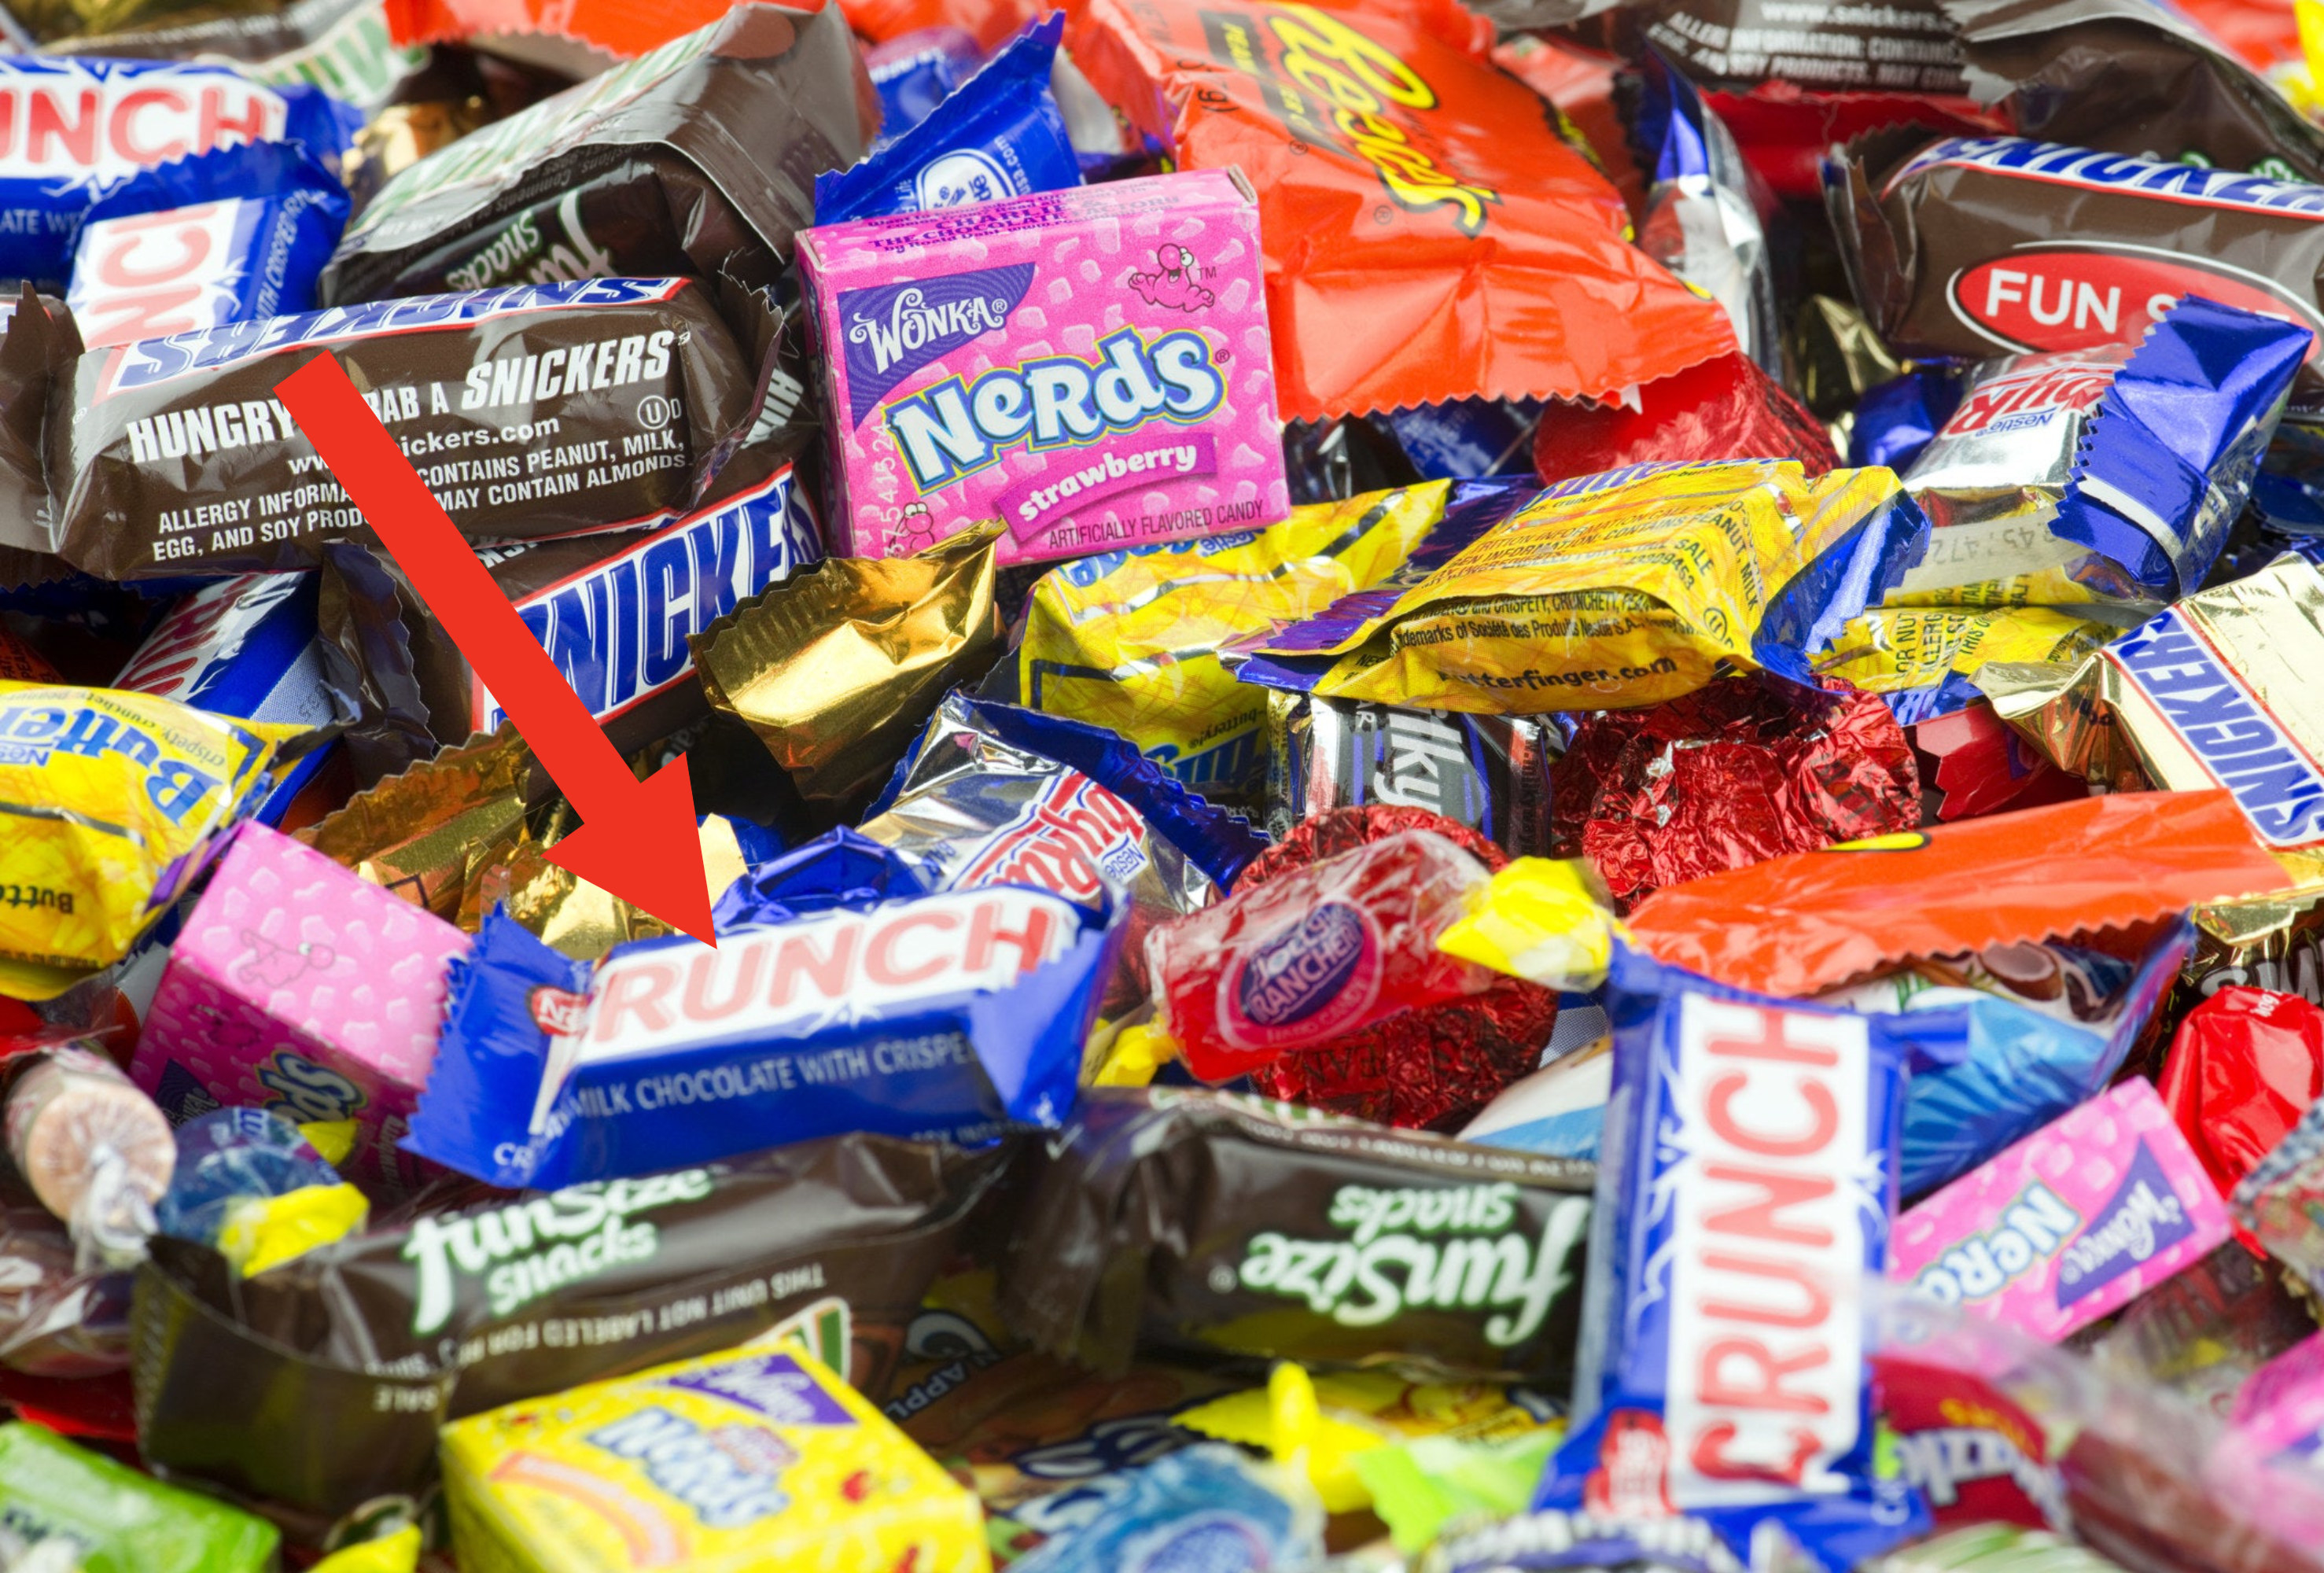 A pile of wrapped candies.